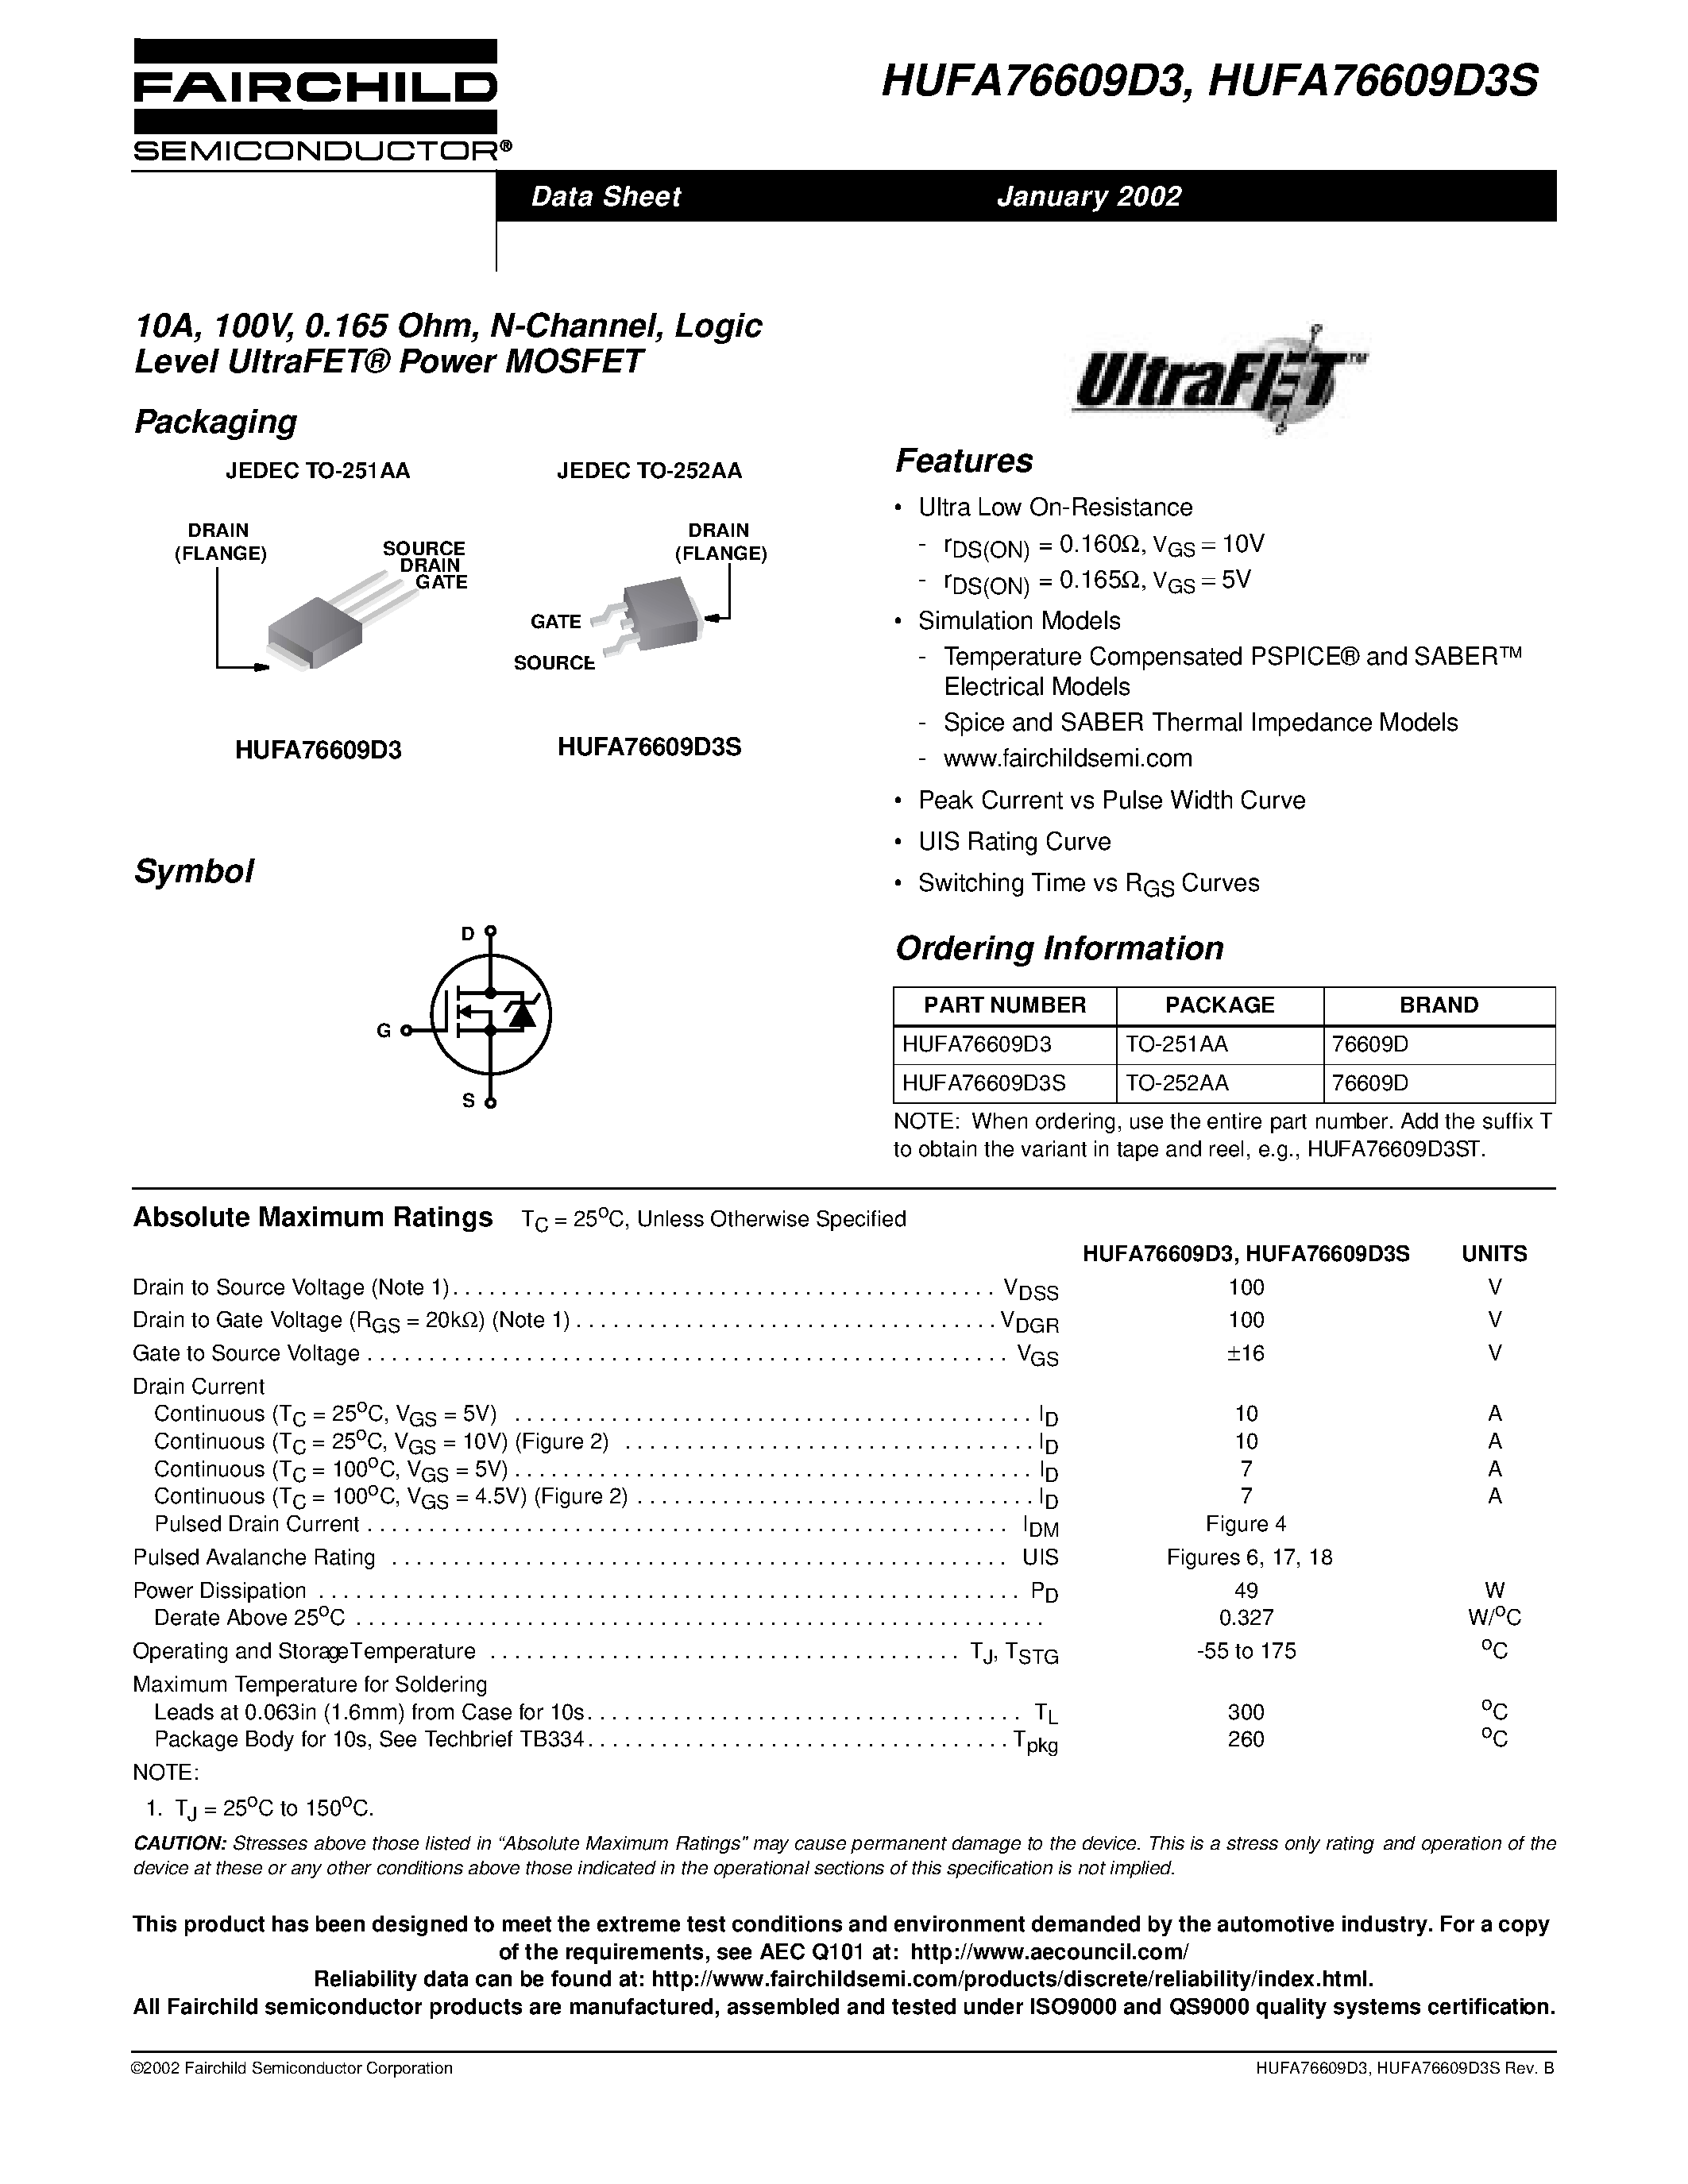 Datasheet HUFA76609D3S - 10A/ 100V/ 0.165 Ohm/ N-Channel/ Logic Level UltraFET Power MOSFET page 1